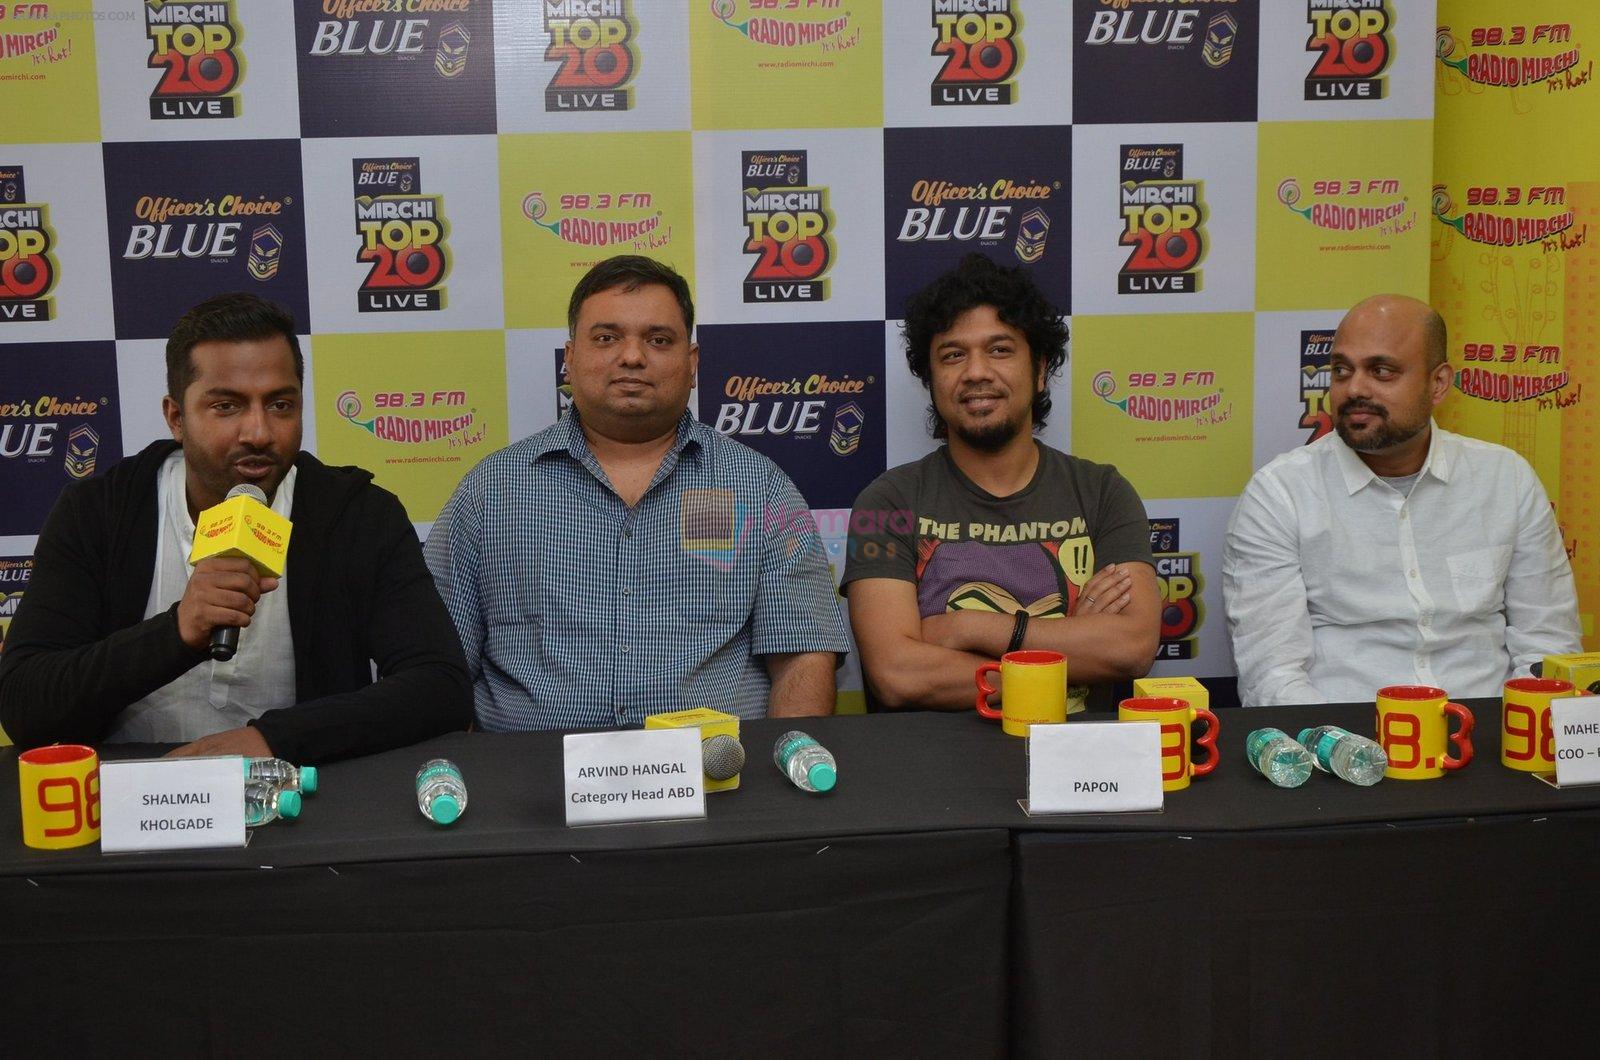 Papon at the Announcement Of Mirchi Top 20 Concert on 10th Oct 2016